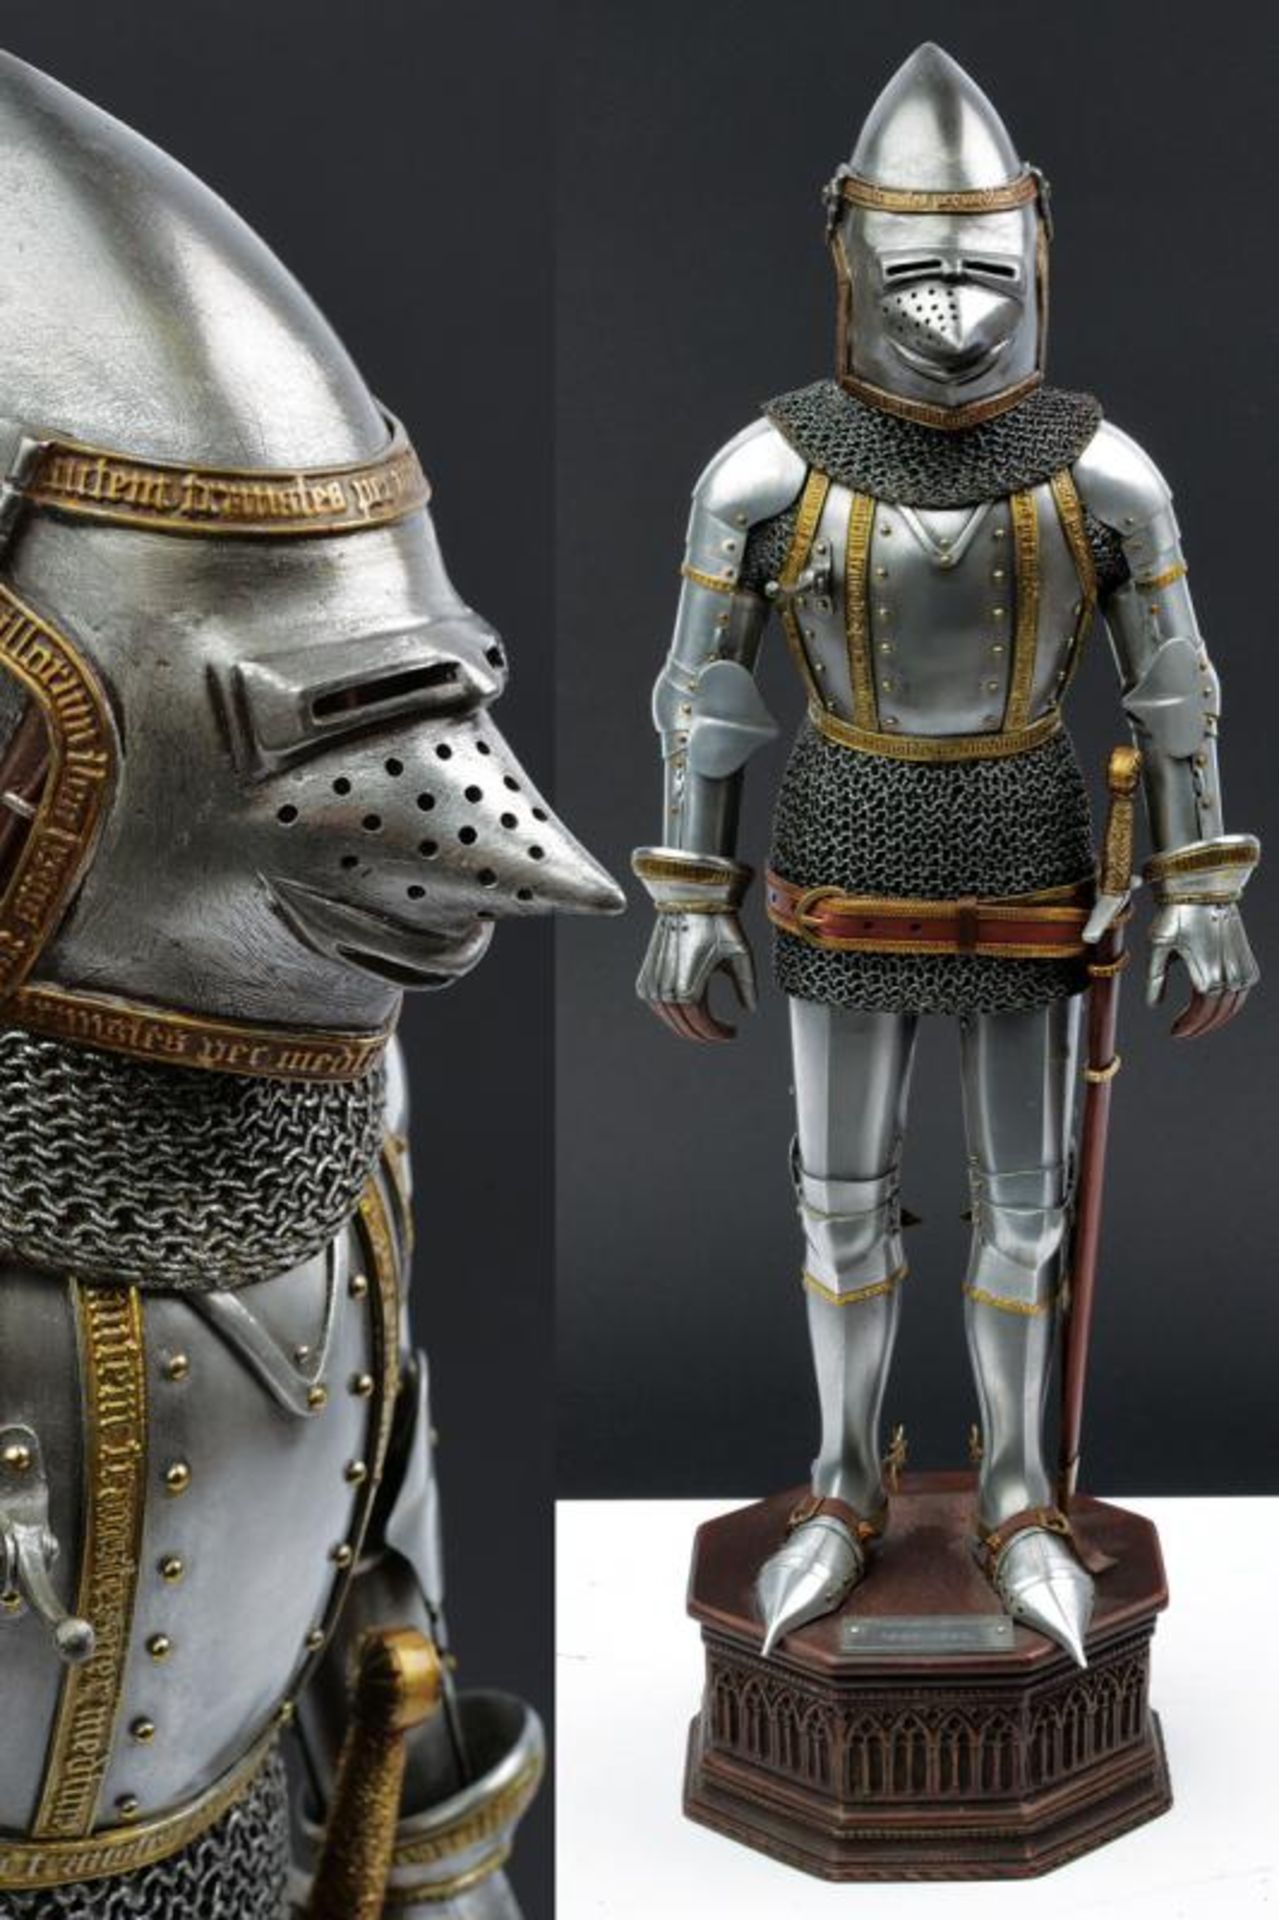 A very fine model of a knight in armour